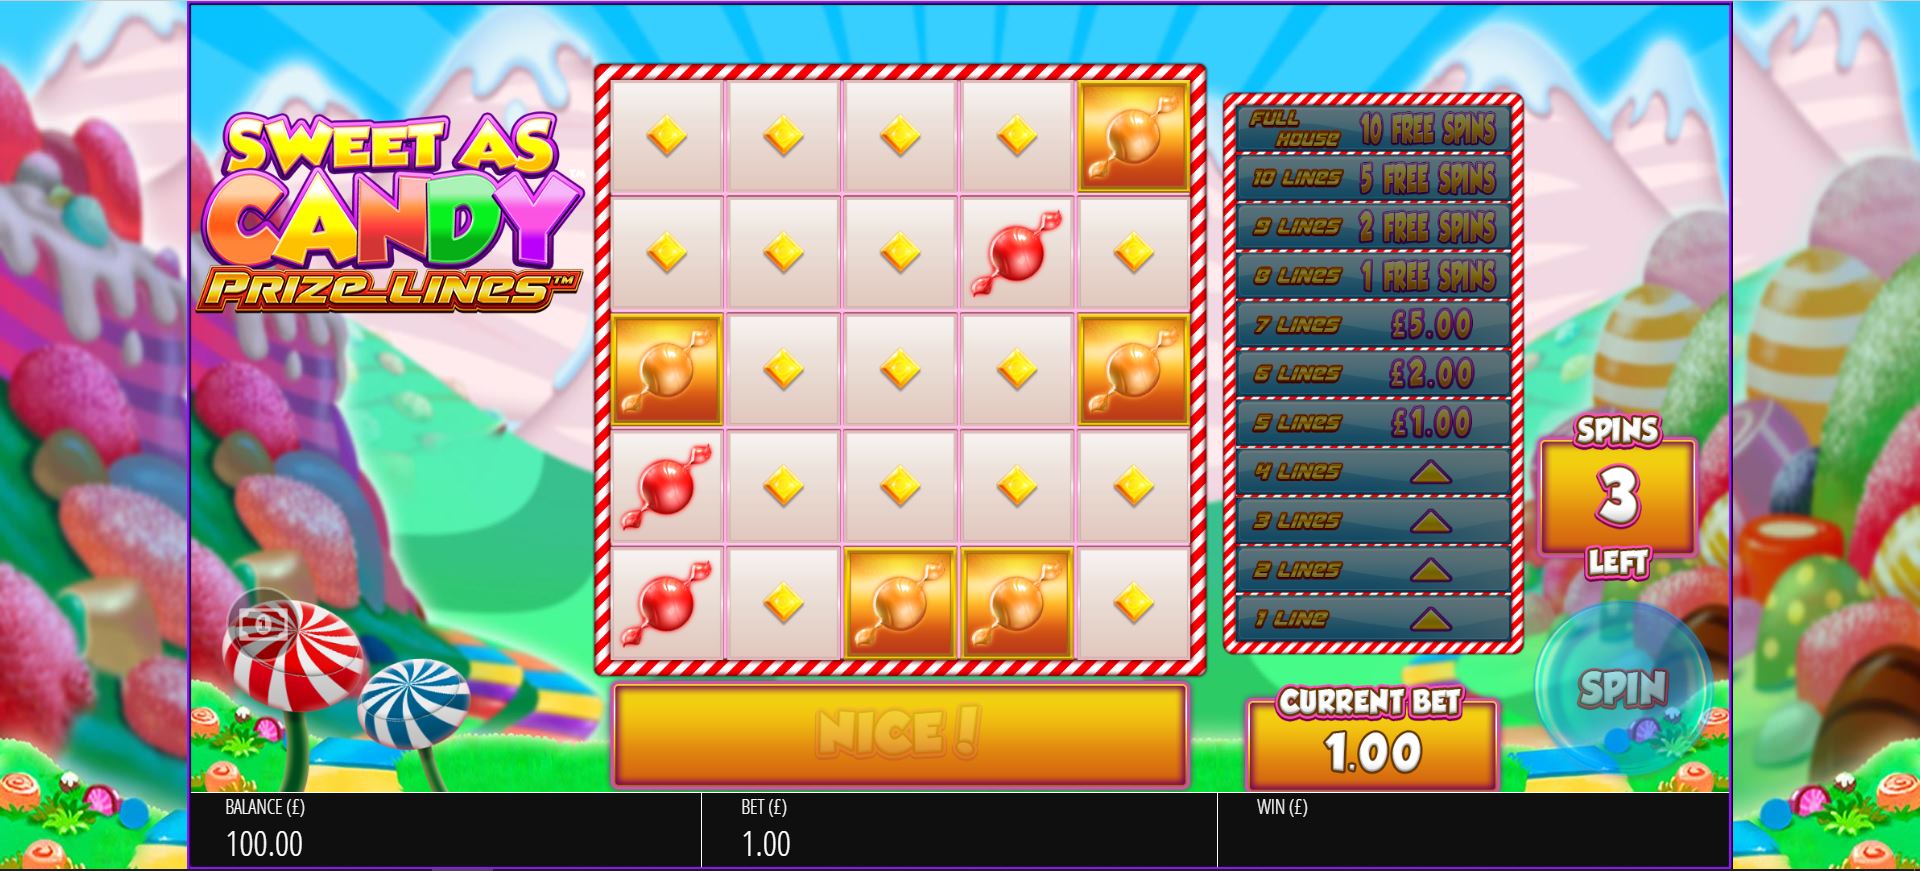 Sweet As Candy Prizelines Free Spins